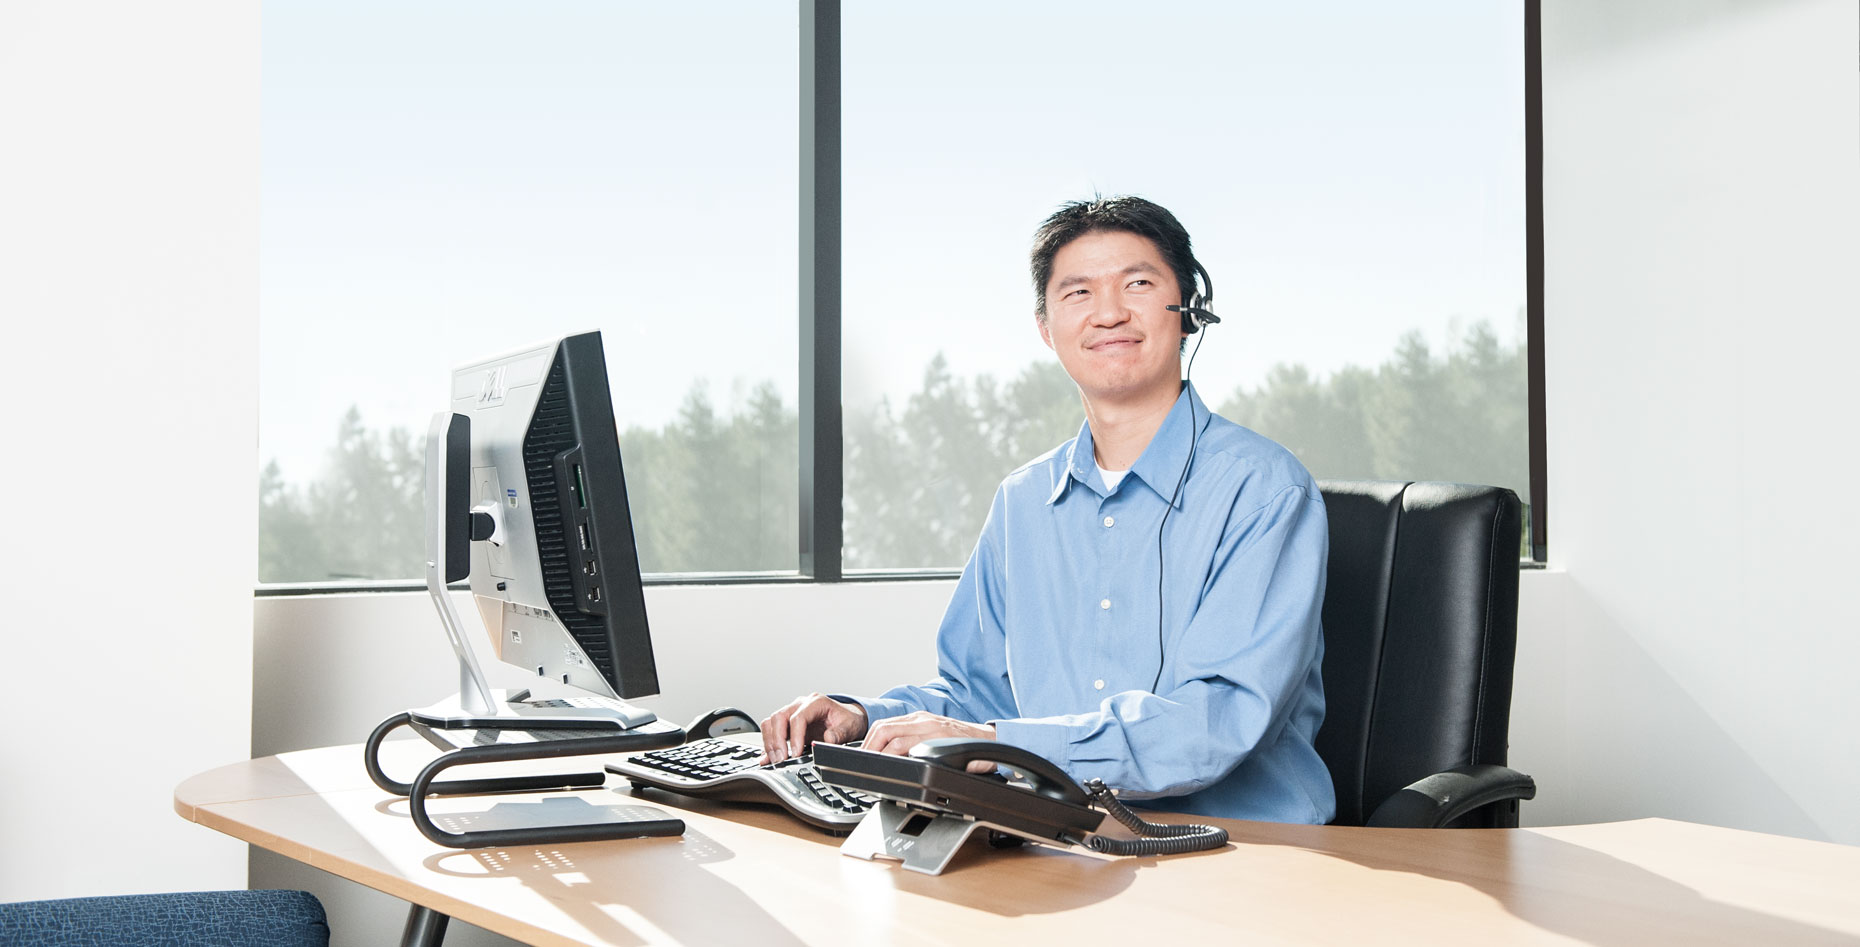 A man in a blue shirt seated at a computer and wearing a hands-free phone headset